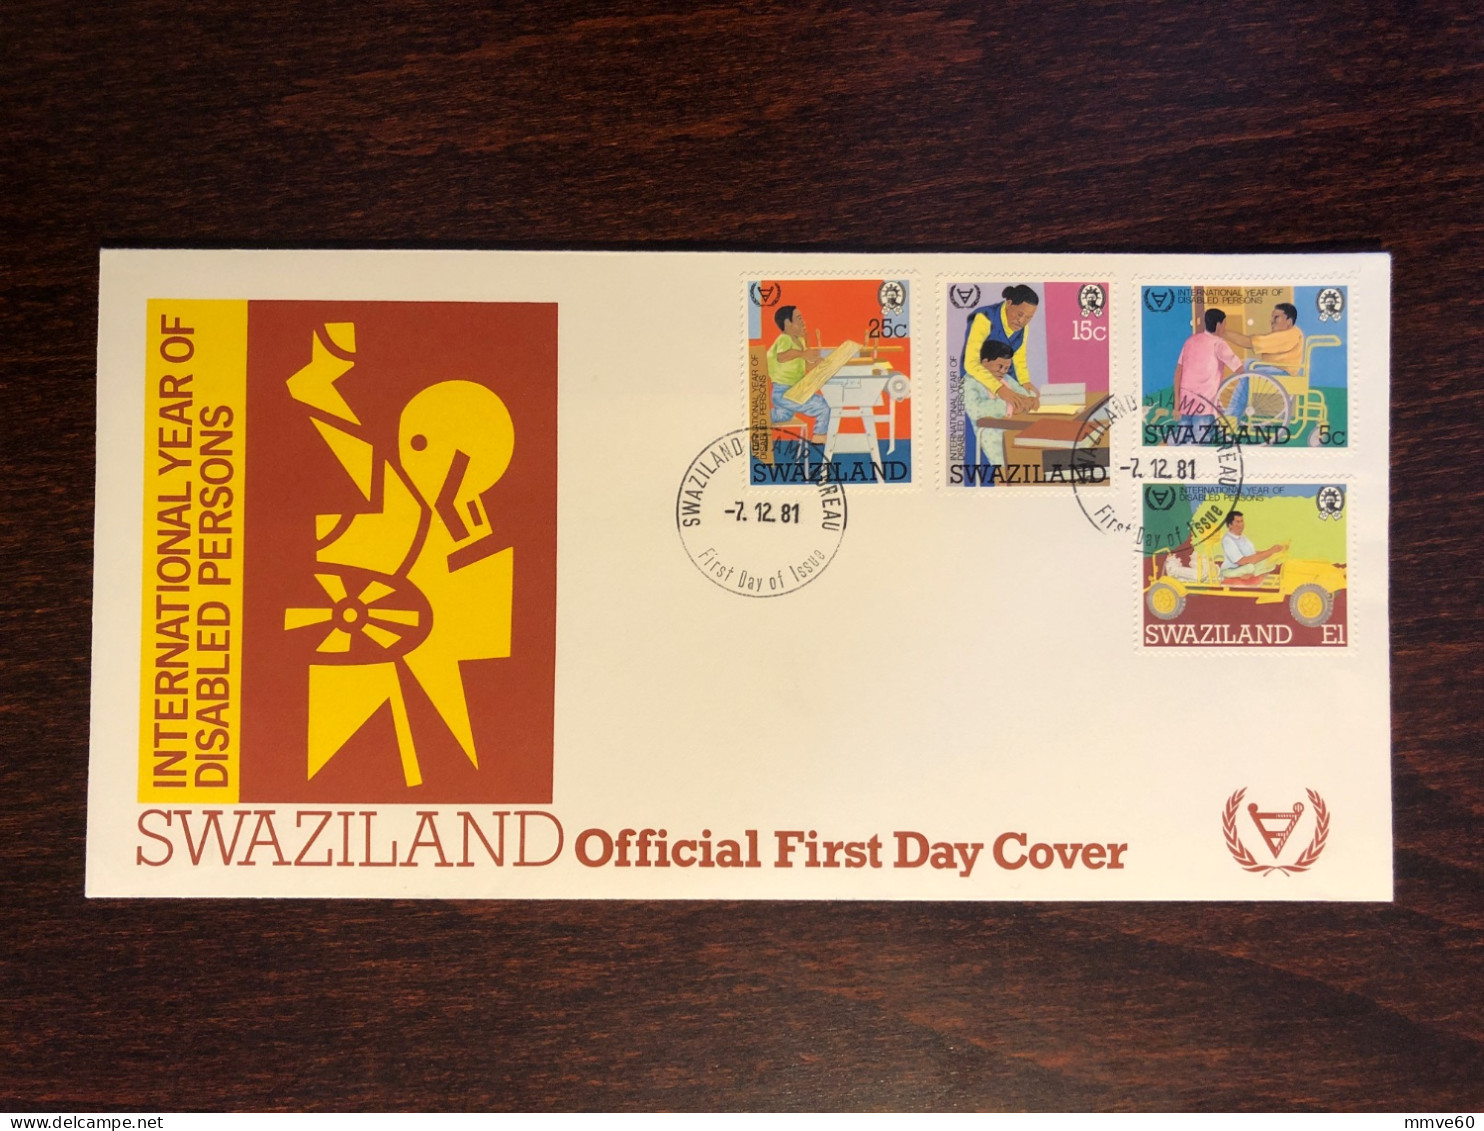 SWAZILAND FDC COVER 1981 YEAR DISABLED PEOPLE HEALTH MEDICINE STAMPS - Swaziland (1968-...)